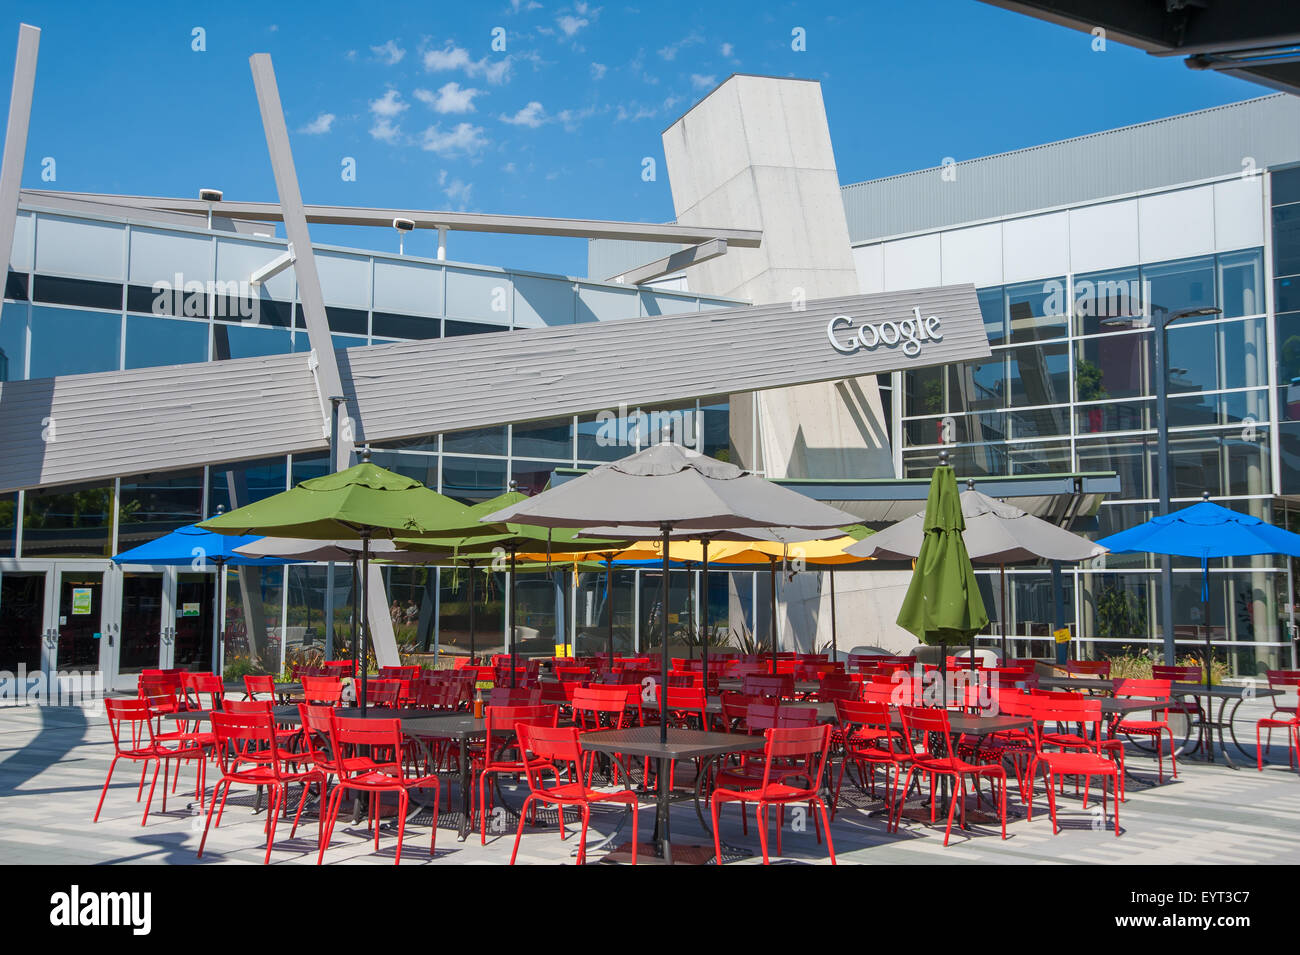 MOUNTAIN VIEW, CA - AUGUST 1, 2015: Dining area for Google employees at Google's headquarters, also known as Googleplex, in Moun Stock Photo